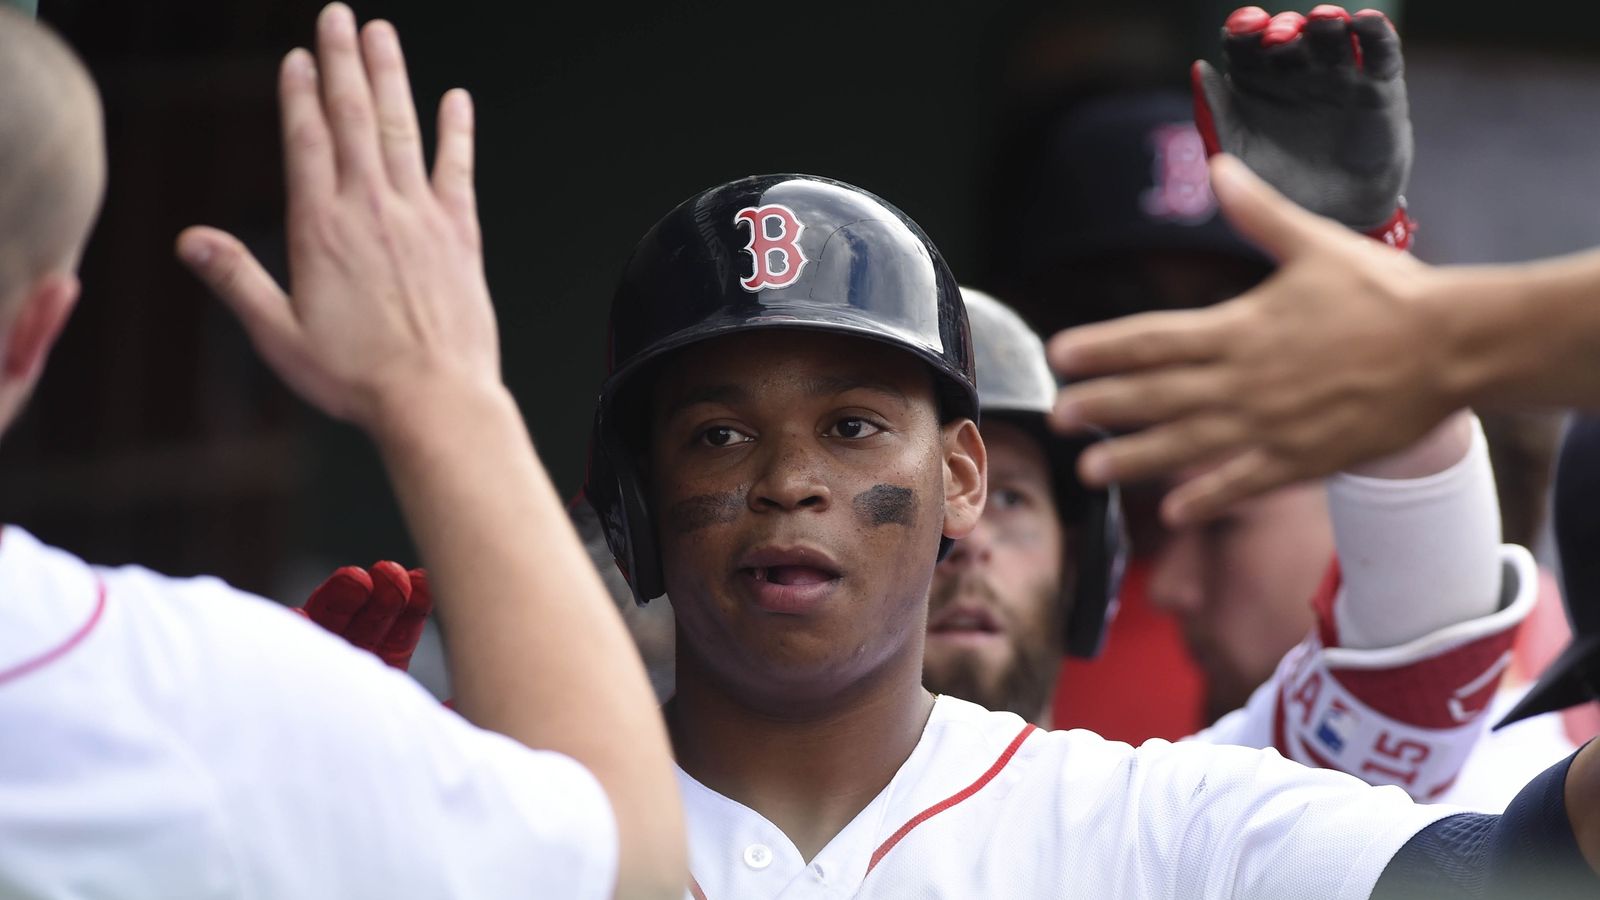 BSJ Live Coverage: Red Sox at Blue Jays, 1:37 p.m. - Bobby Dalbec